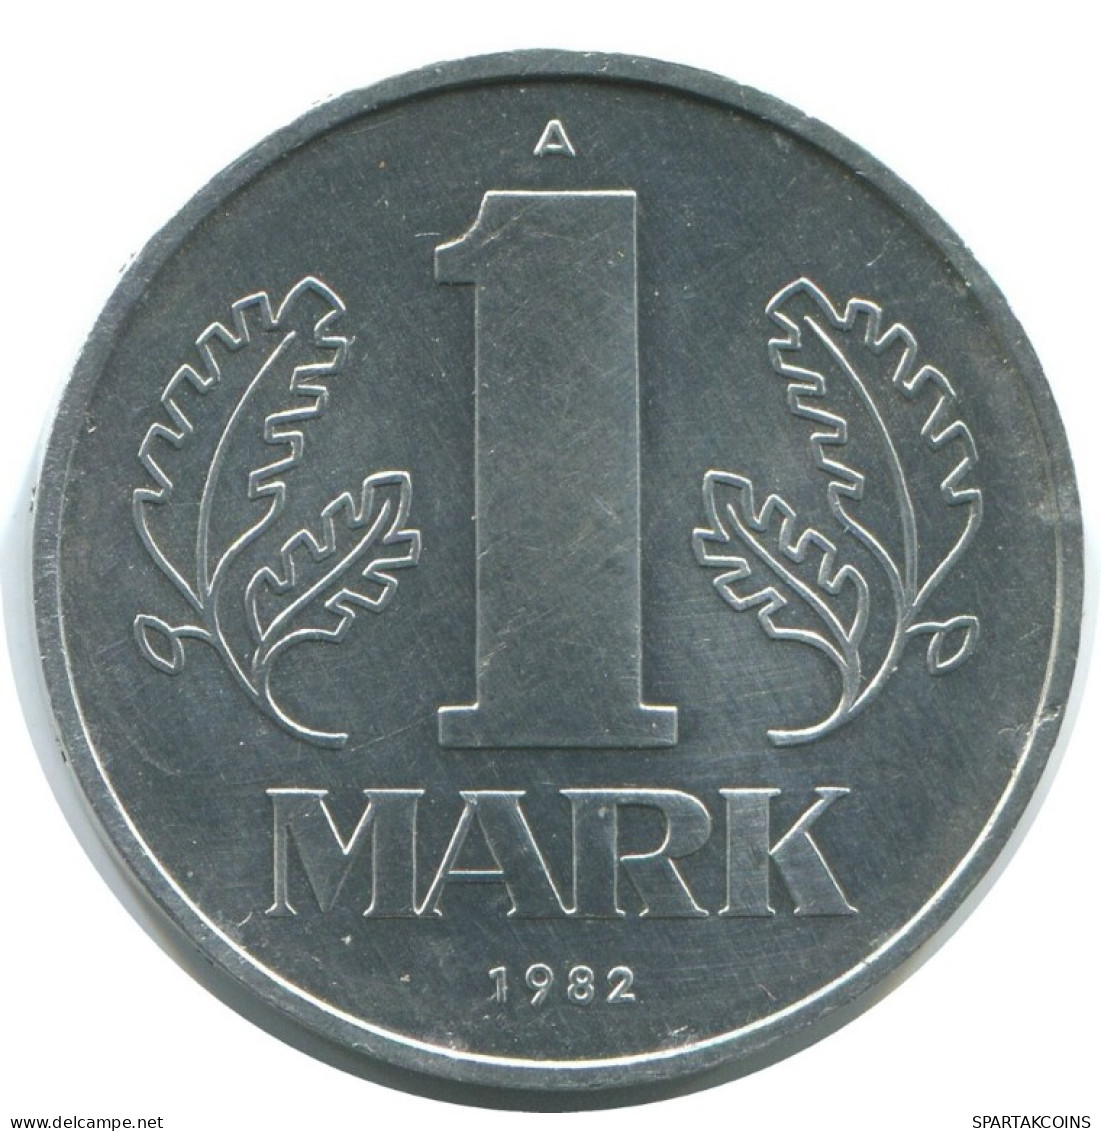 1 MARK 1982 A DDR EAST ALLEMAGNE Pièce GERMANY #AE142.F.A - 1 Marco